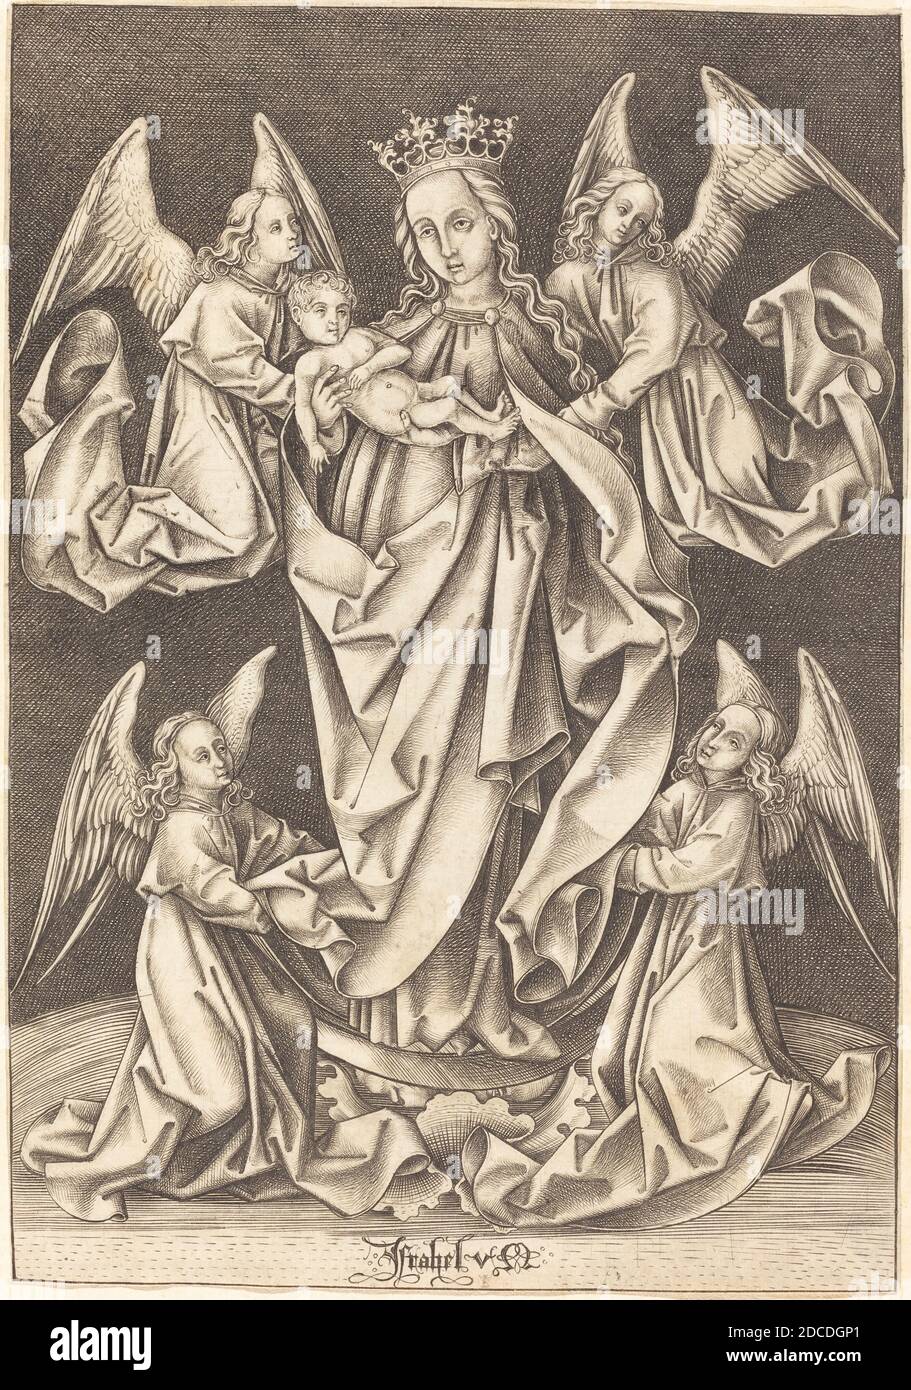 Israhel van Meckenem, (artist), German, c. 1445 - 1503, The Madonna and Child on the Crescent Supported by Four Angels, c. 1490/1500, engraving Stock Photo